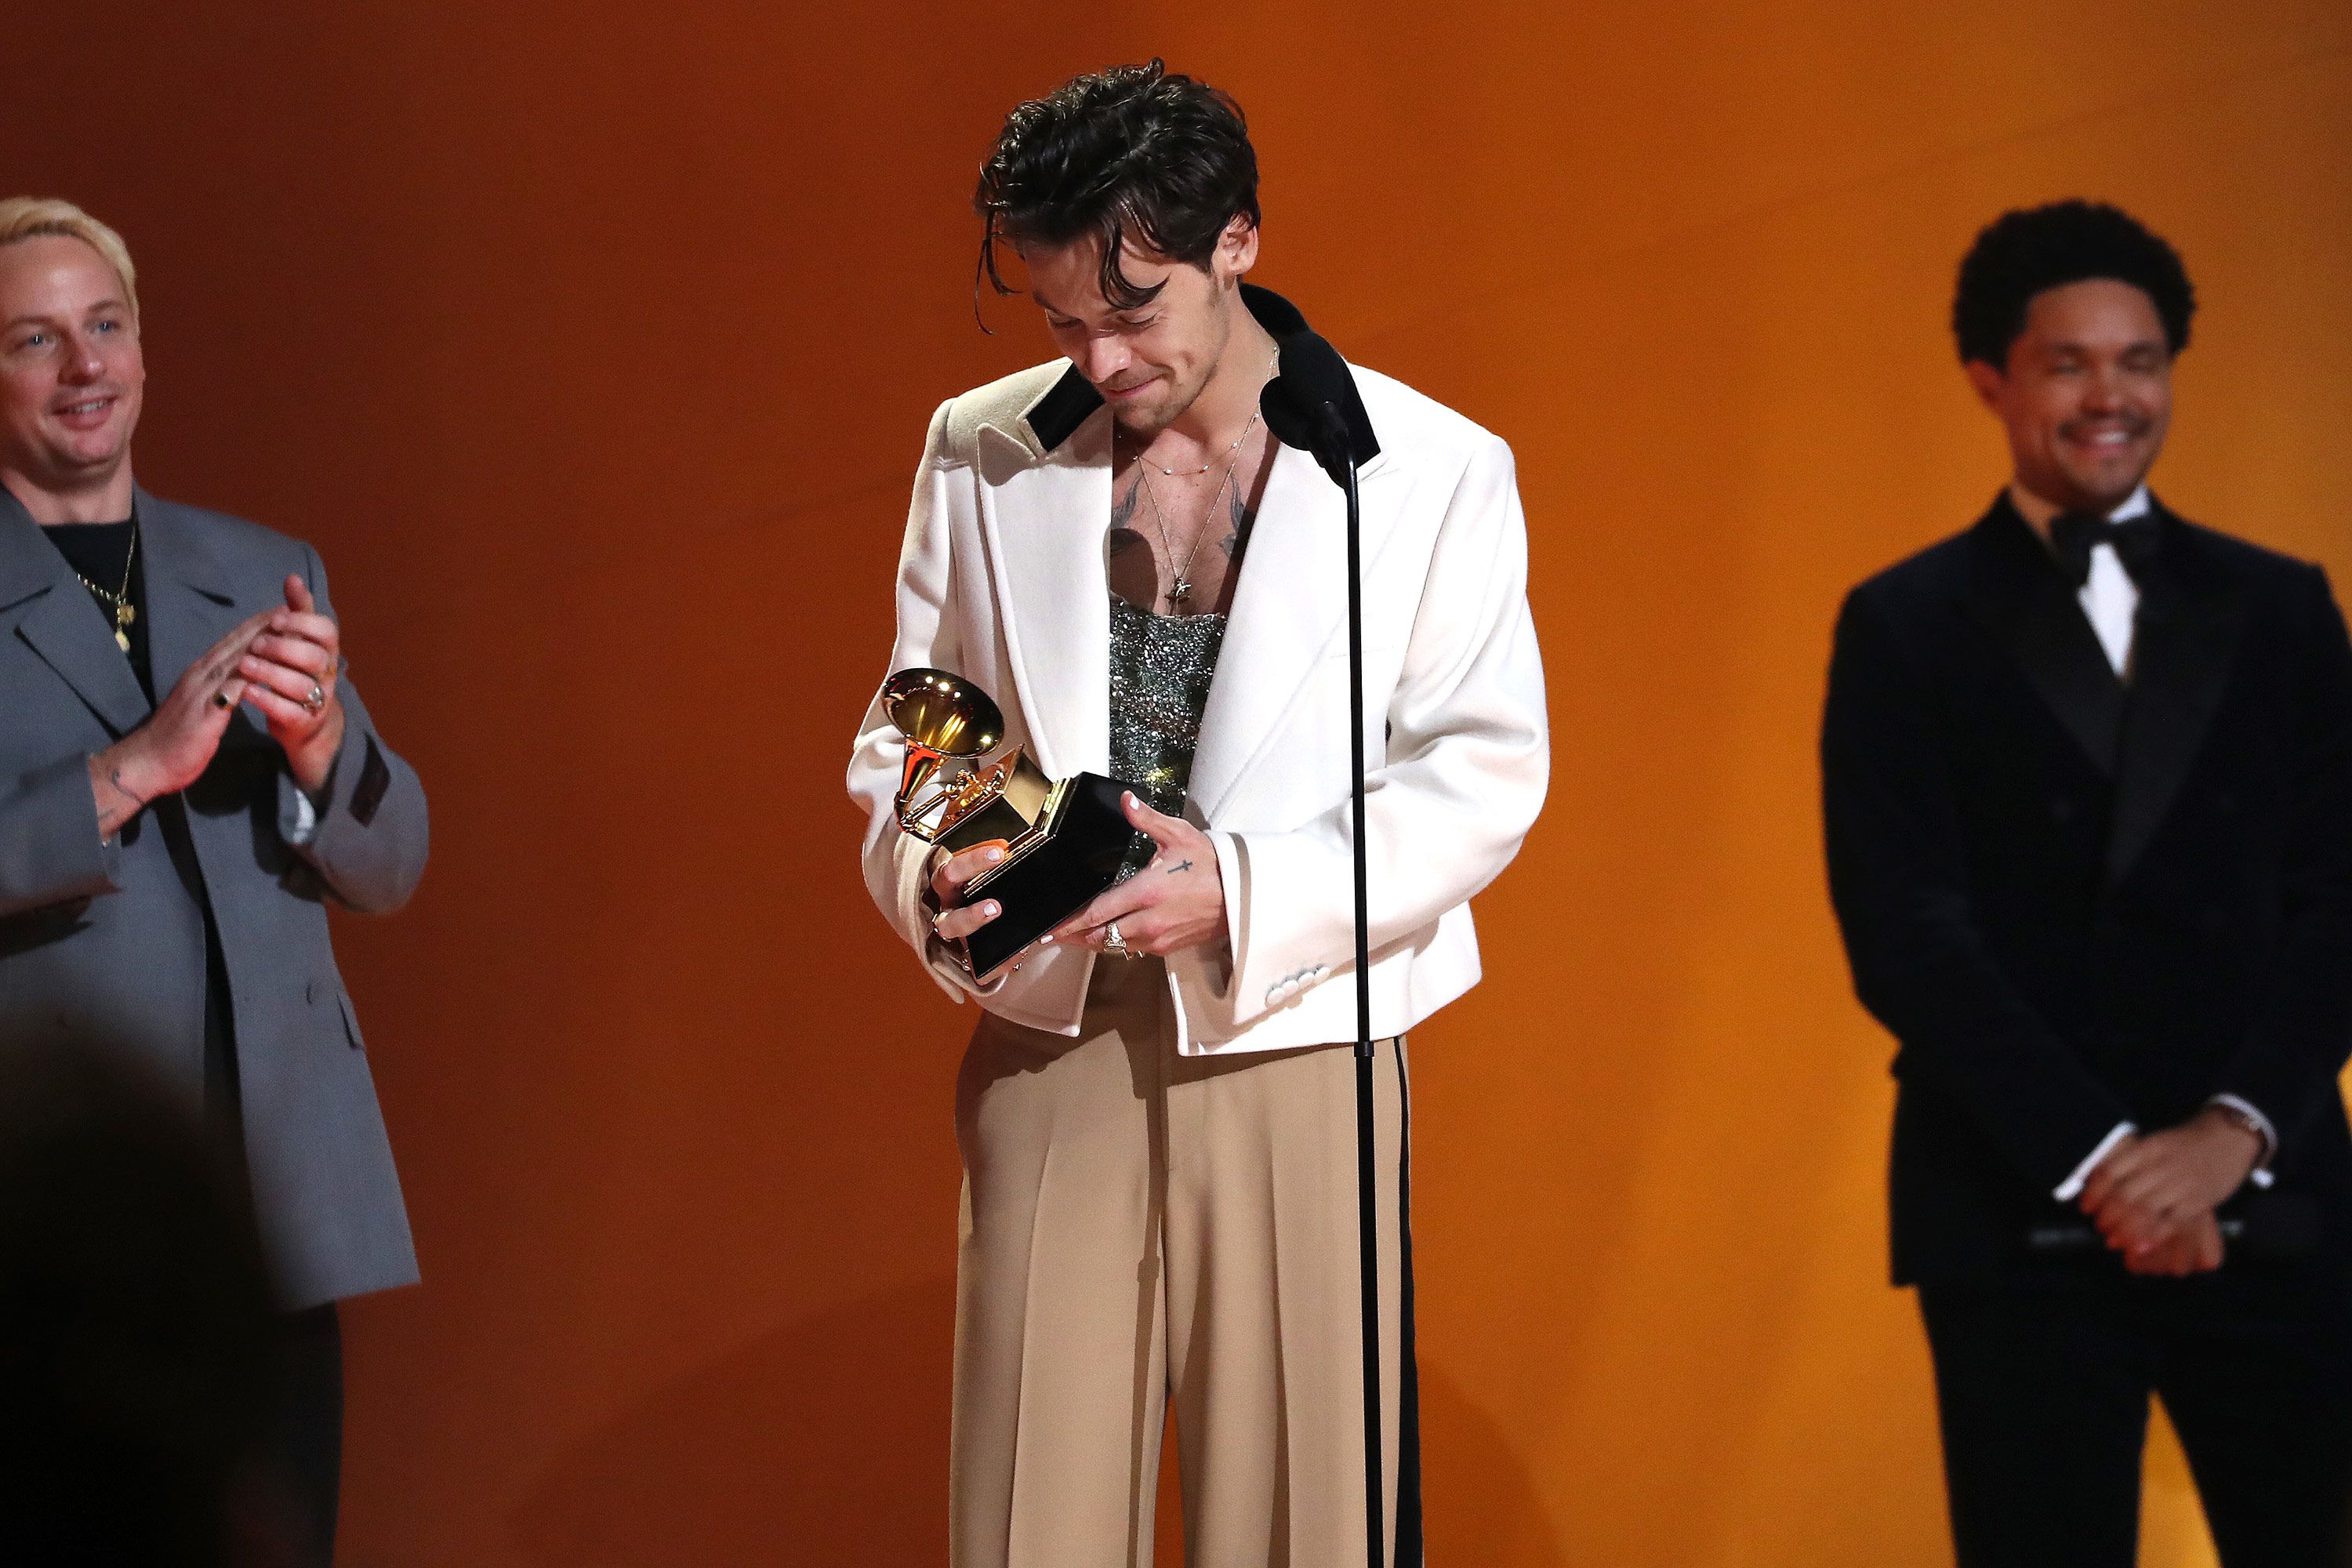 Harry Styles wins album of the year and other big moments from the Grammys